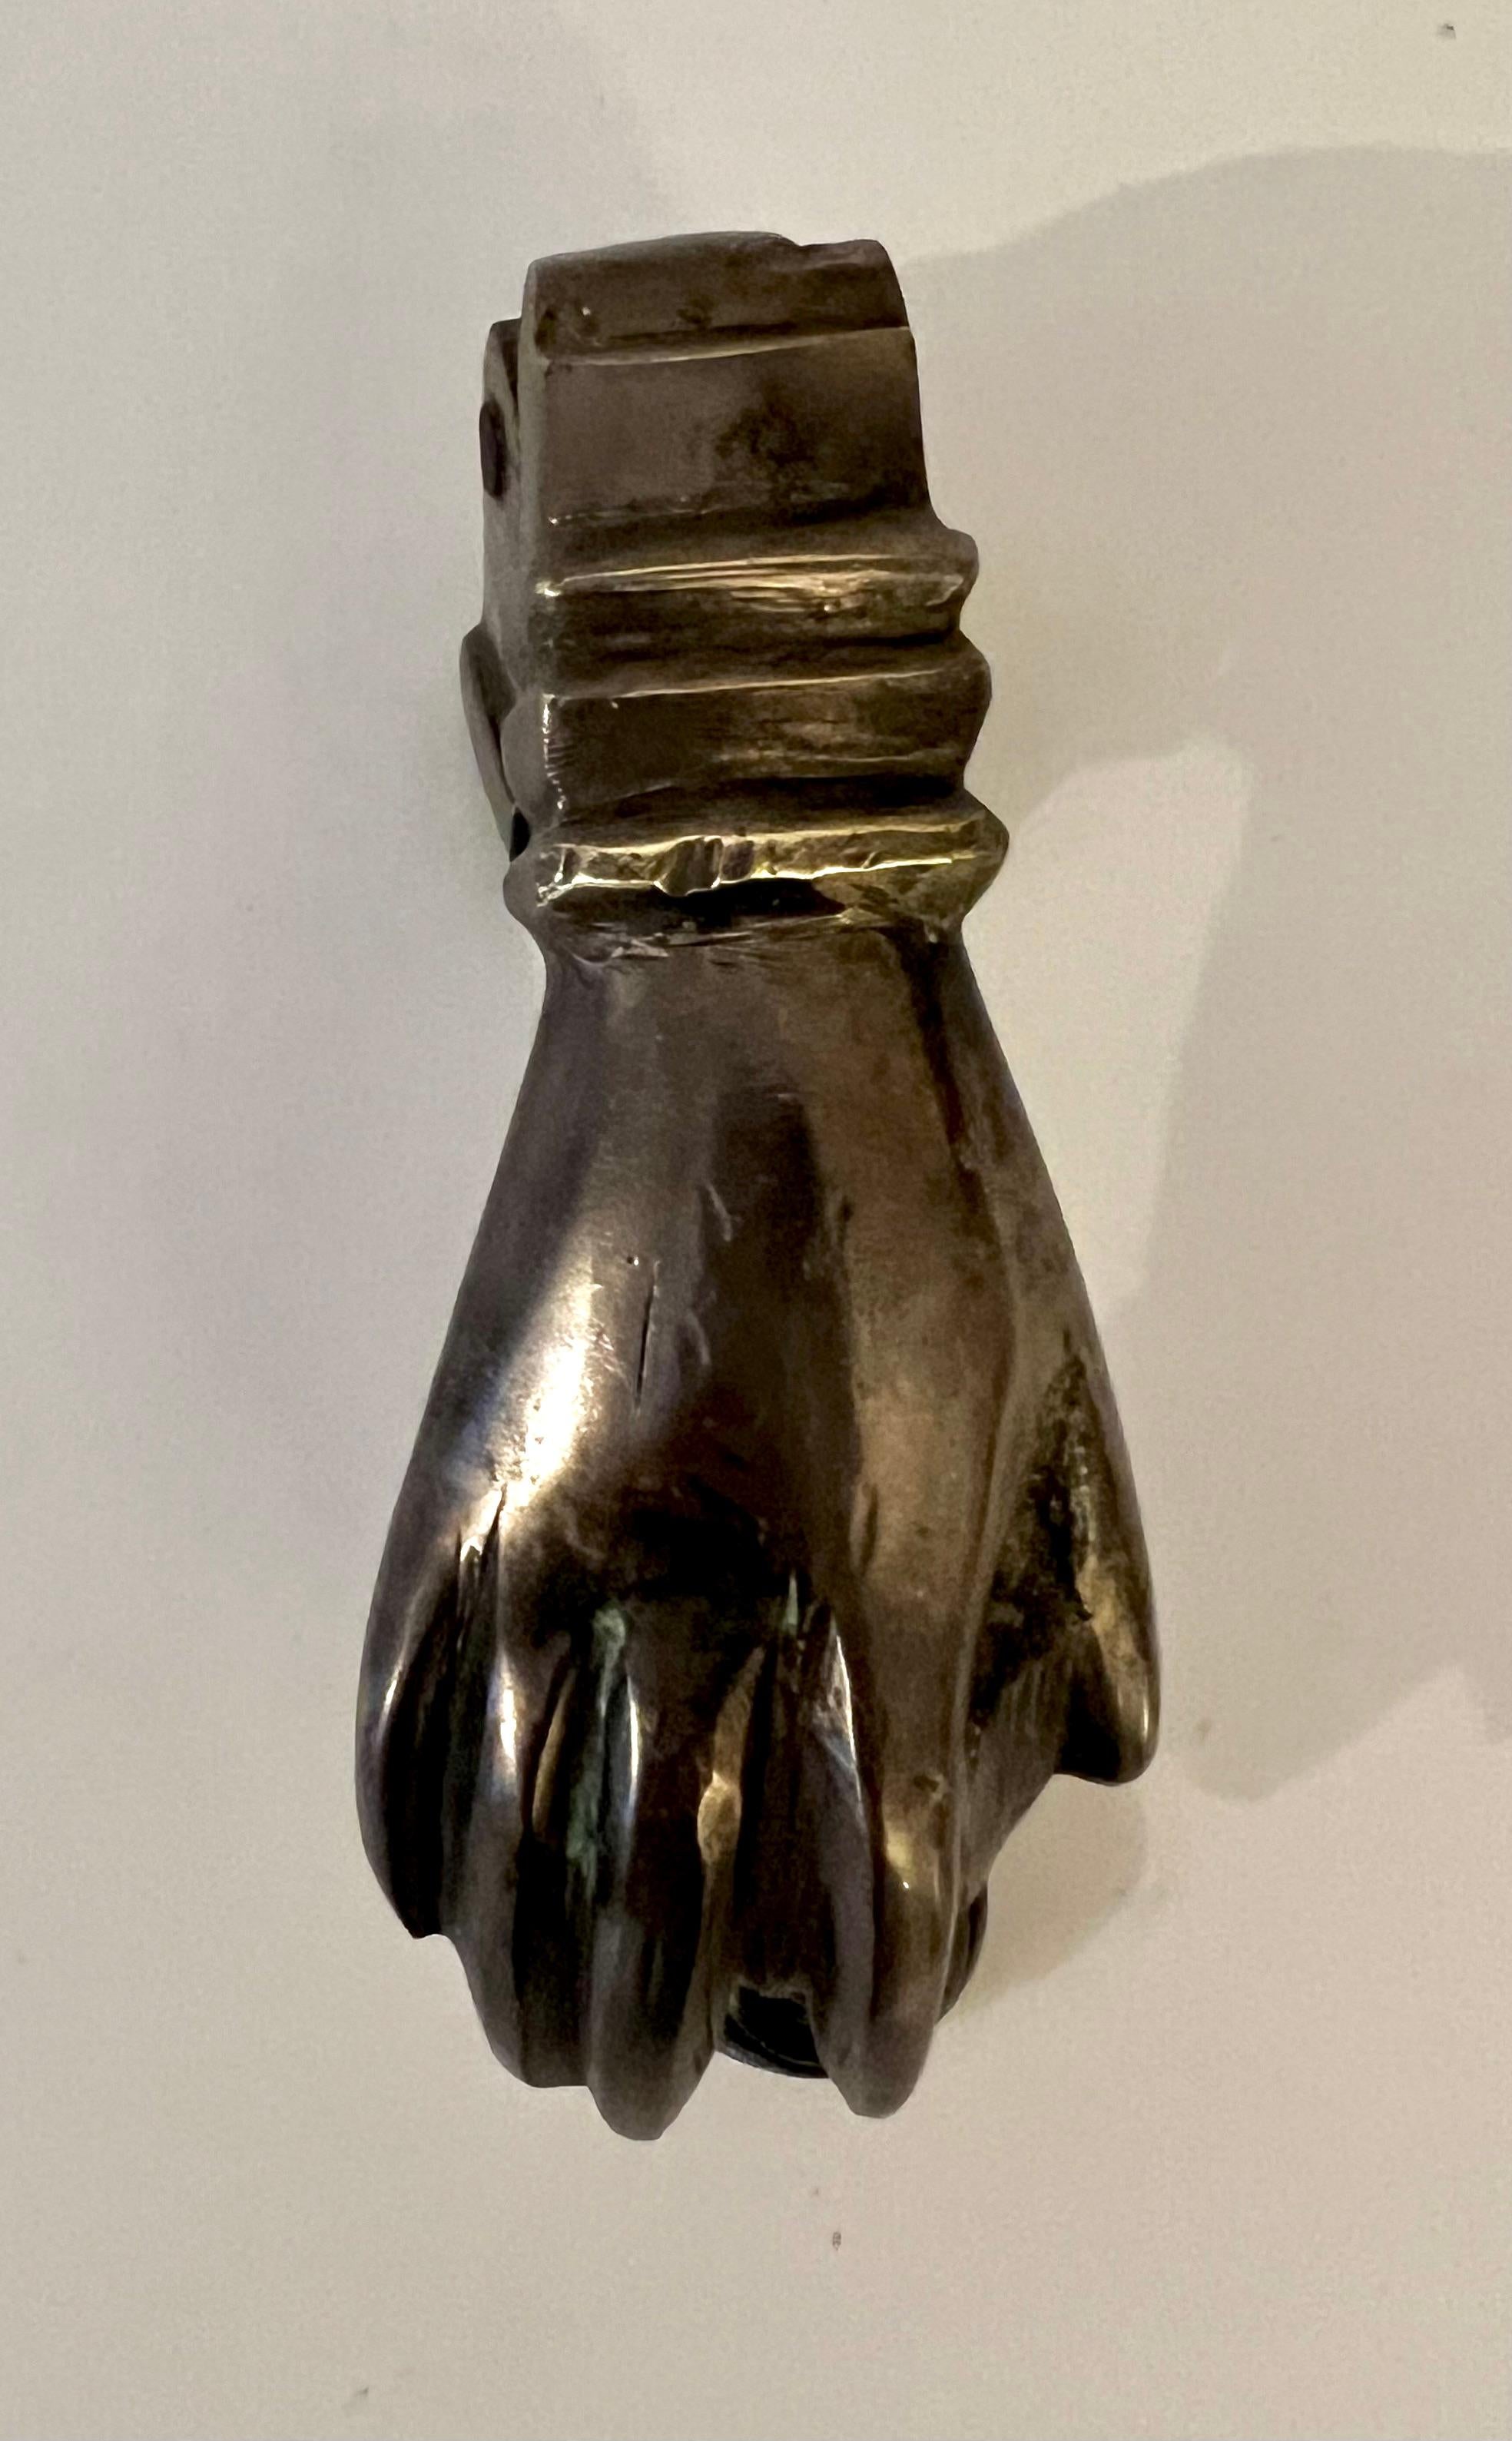 A wonderful door knocker in the shape of a hand. The solid bronze piece is petite and comes with the strike... prepared to go through a 2